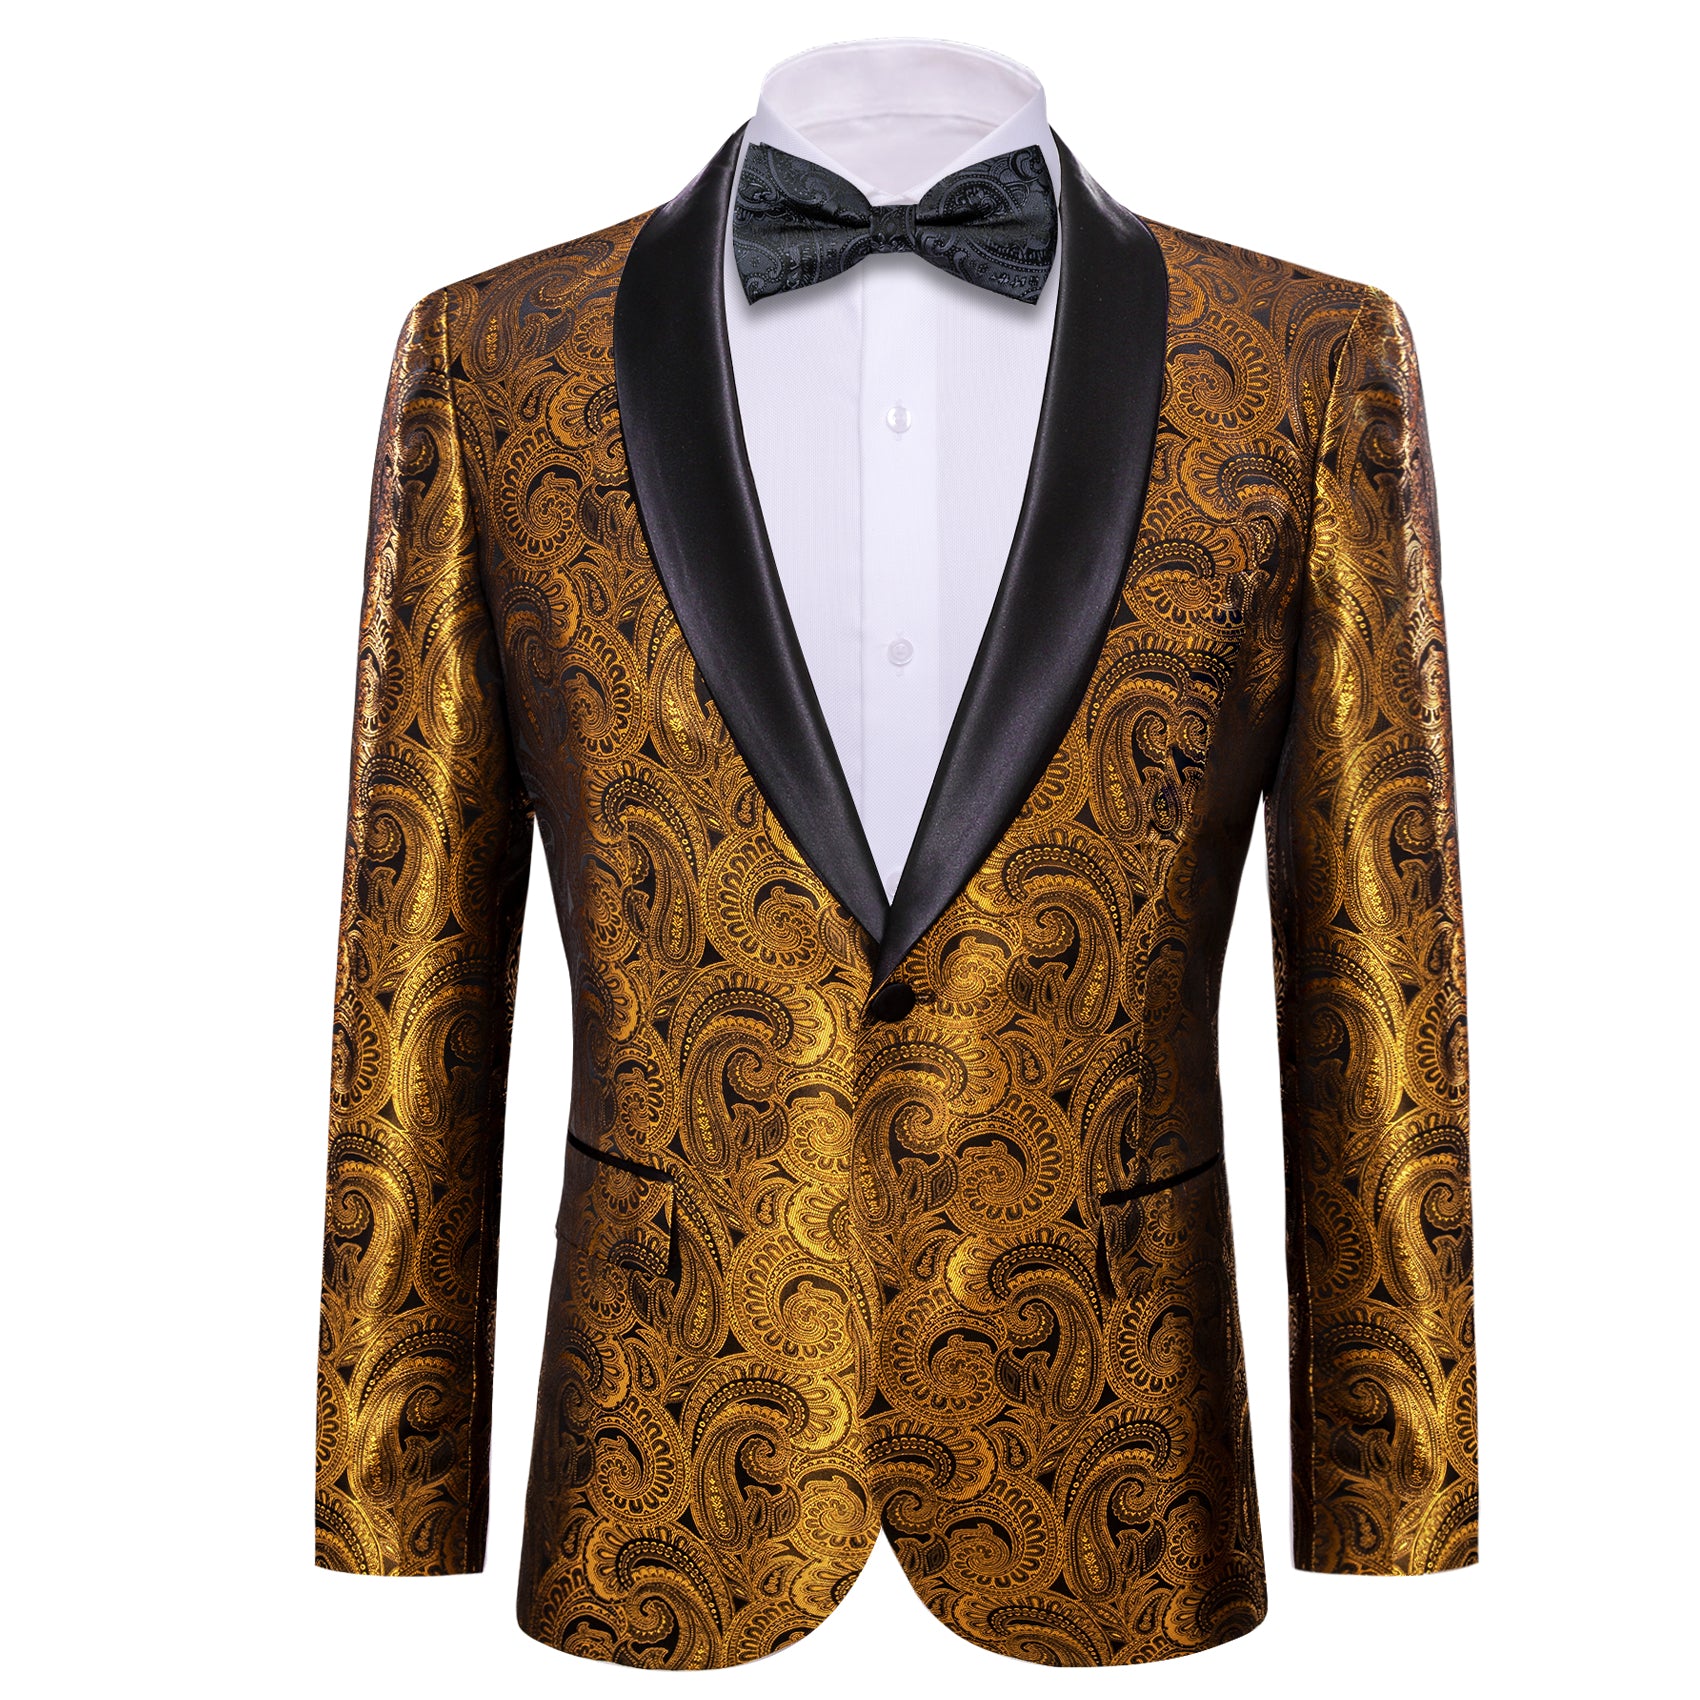 Barry Wang Men's Blazer Brown Gold Floral One Button Stylish Suit brown suit jacket